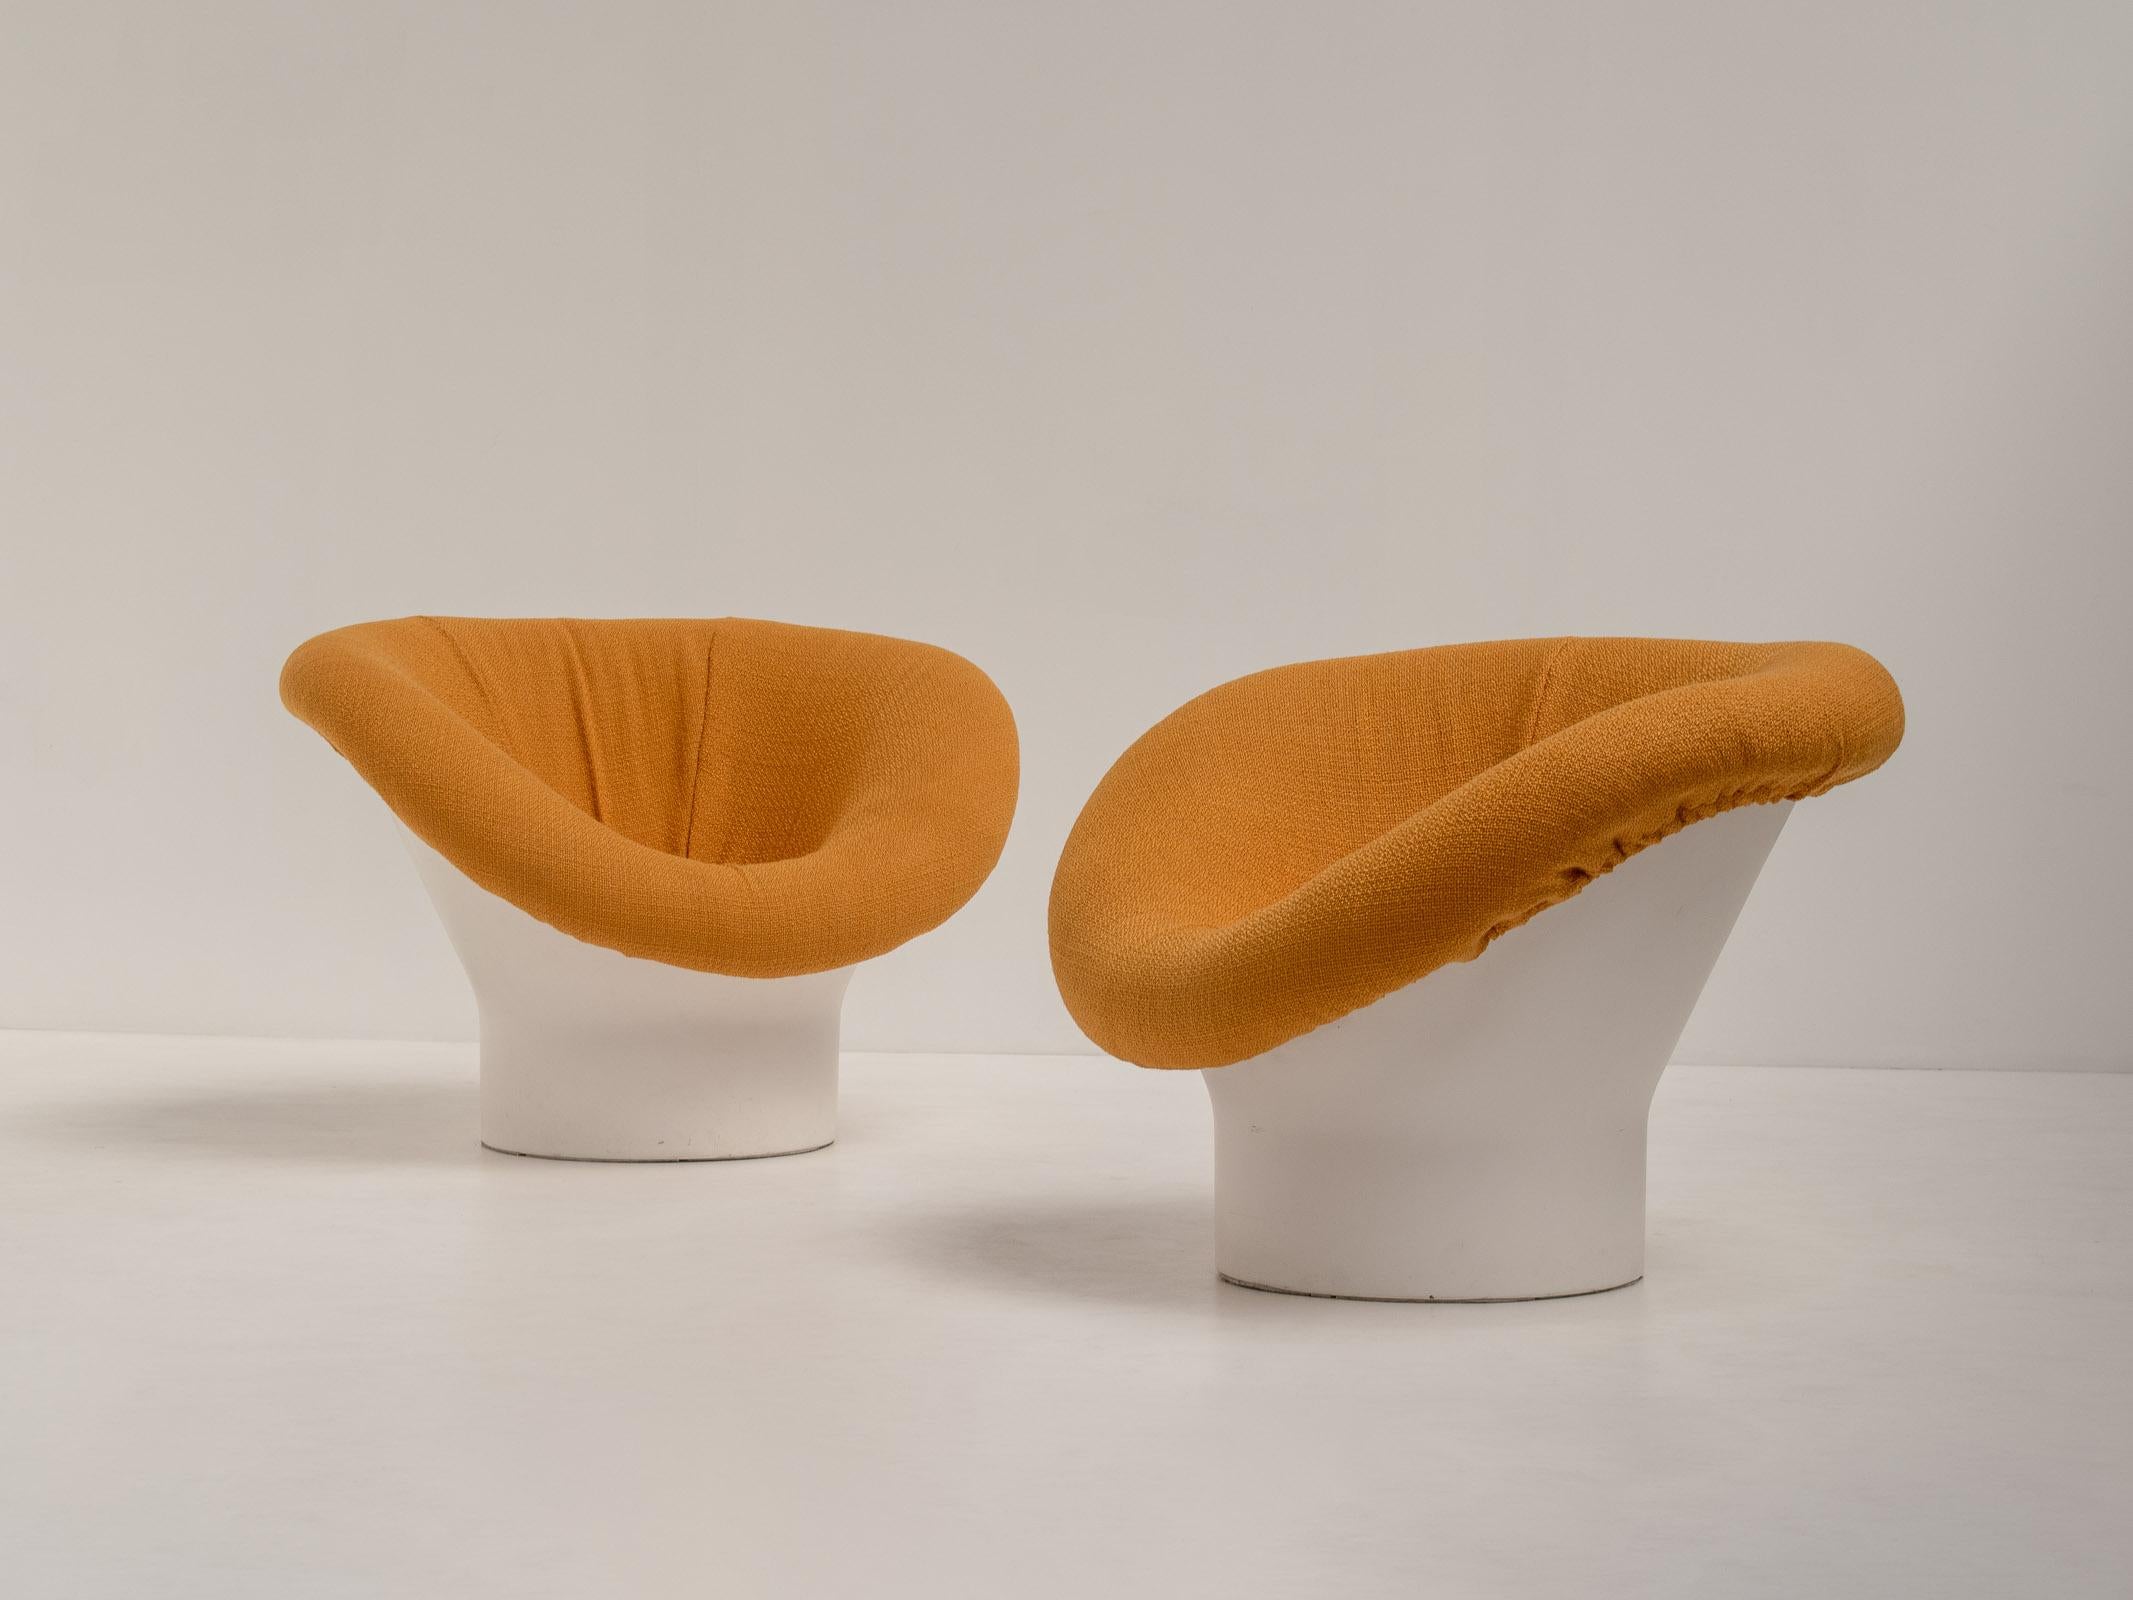 Lennart Bender for Ulferts AB, pair of lounge chairs model 'Krokus', Sweden, 1960s.

The designer was clearly inspired by a flower and translated the design into a very cool and sleek chair. They are the perfect fun element to light up any space or